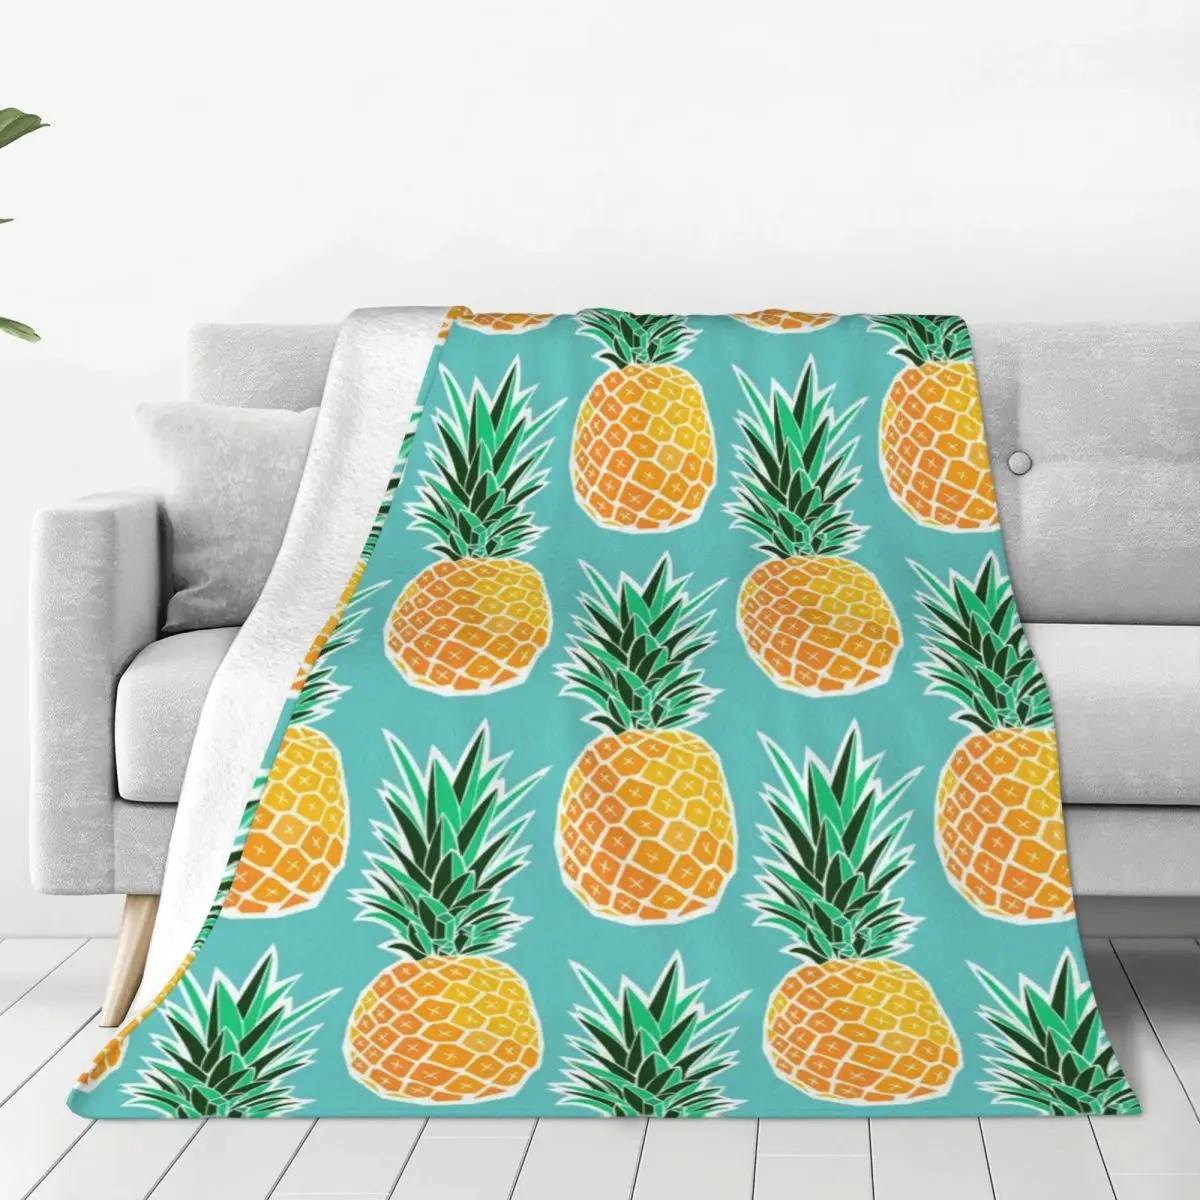 

Pineapple Art Soft Fleece Throw Blanket Warm and Cozy for All Seasons Comfy Microfiber Blanket for Couch Sofa Bed 40"x30"